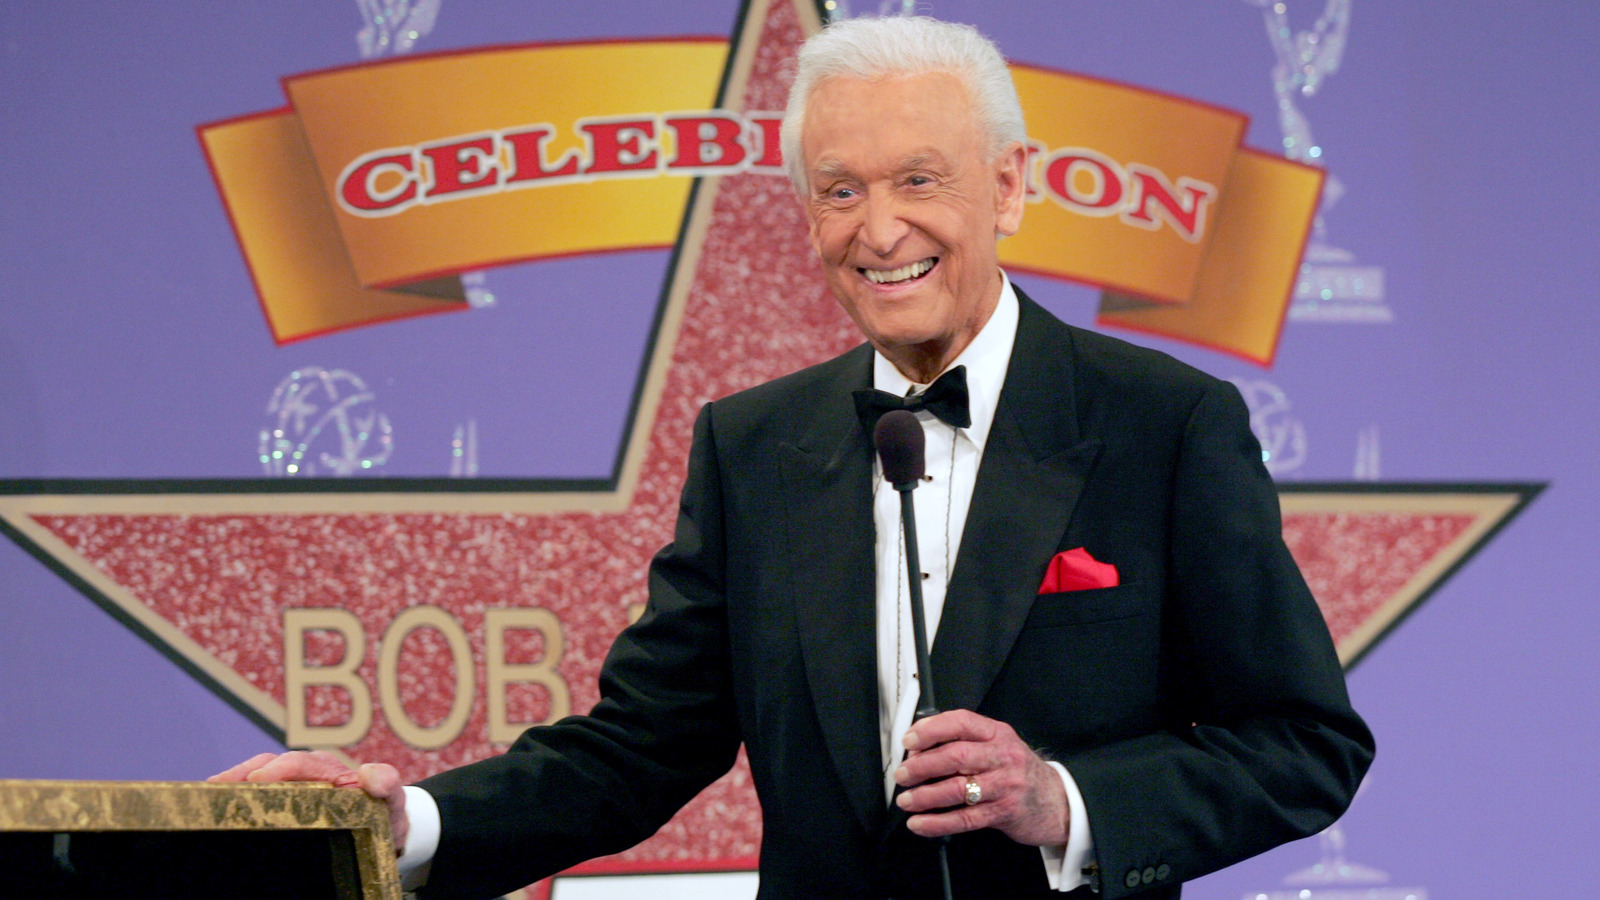 Bob Barker’s Signature Microphone Sold At Auction, And For More Than You’d Think – SlashGear